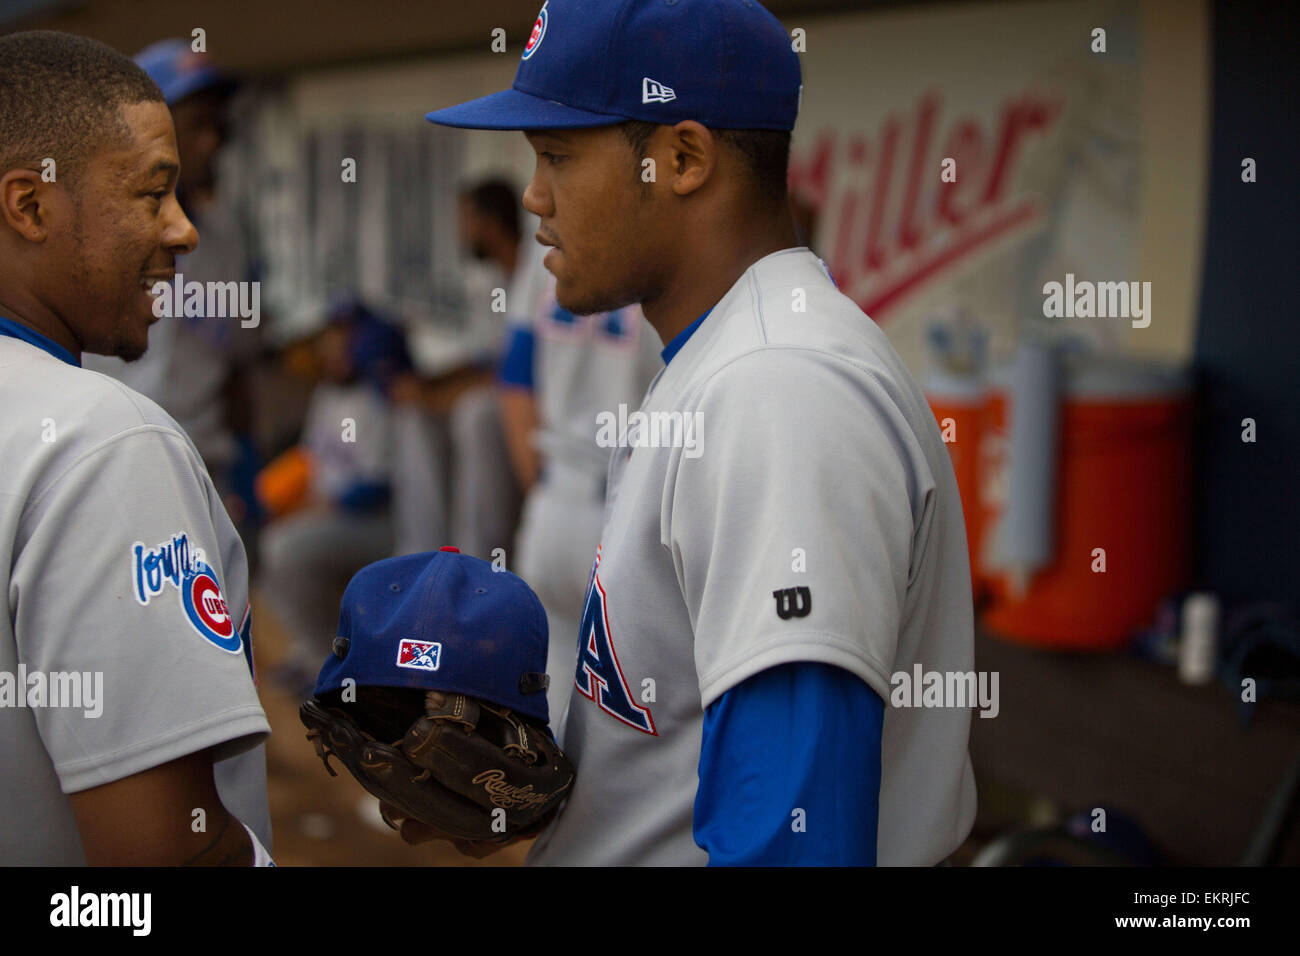 New Orleans, LA, USA. 13th Apr, 2015. Iowa Cubs shortstop Addison Russell (3) during the game between Iowa Cubs and New Orleans Zephyrs at Zephyr Field in New Orleans, LA. Credit:  csm/Alamy Live News Stock Photo